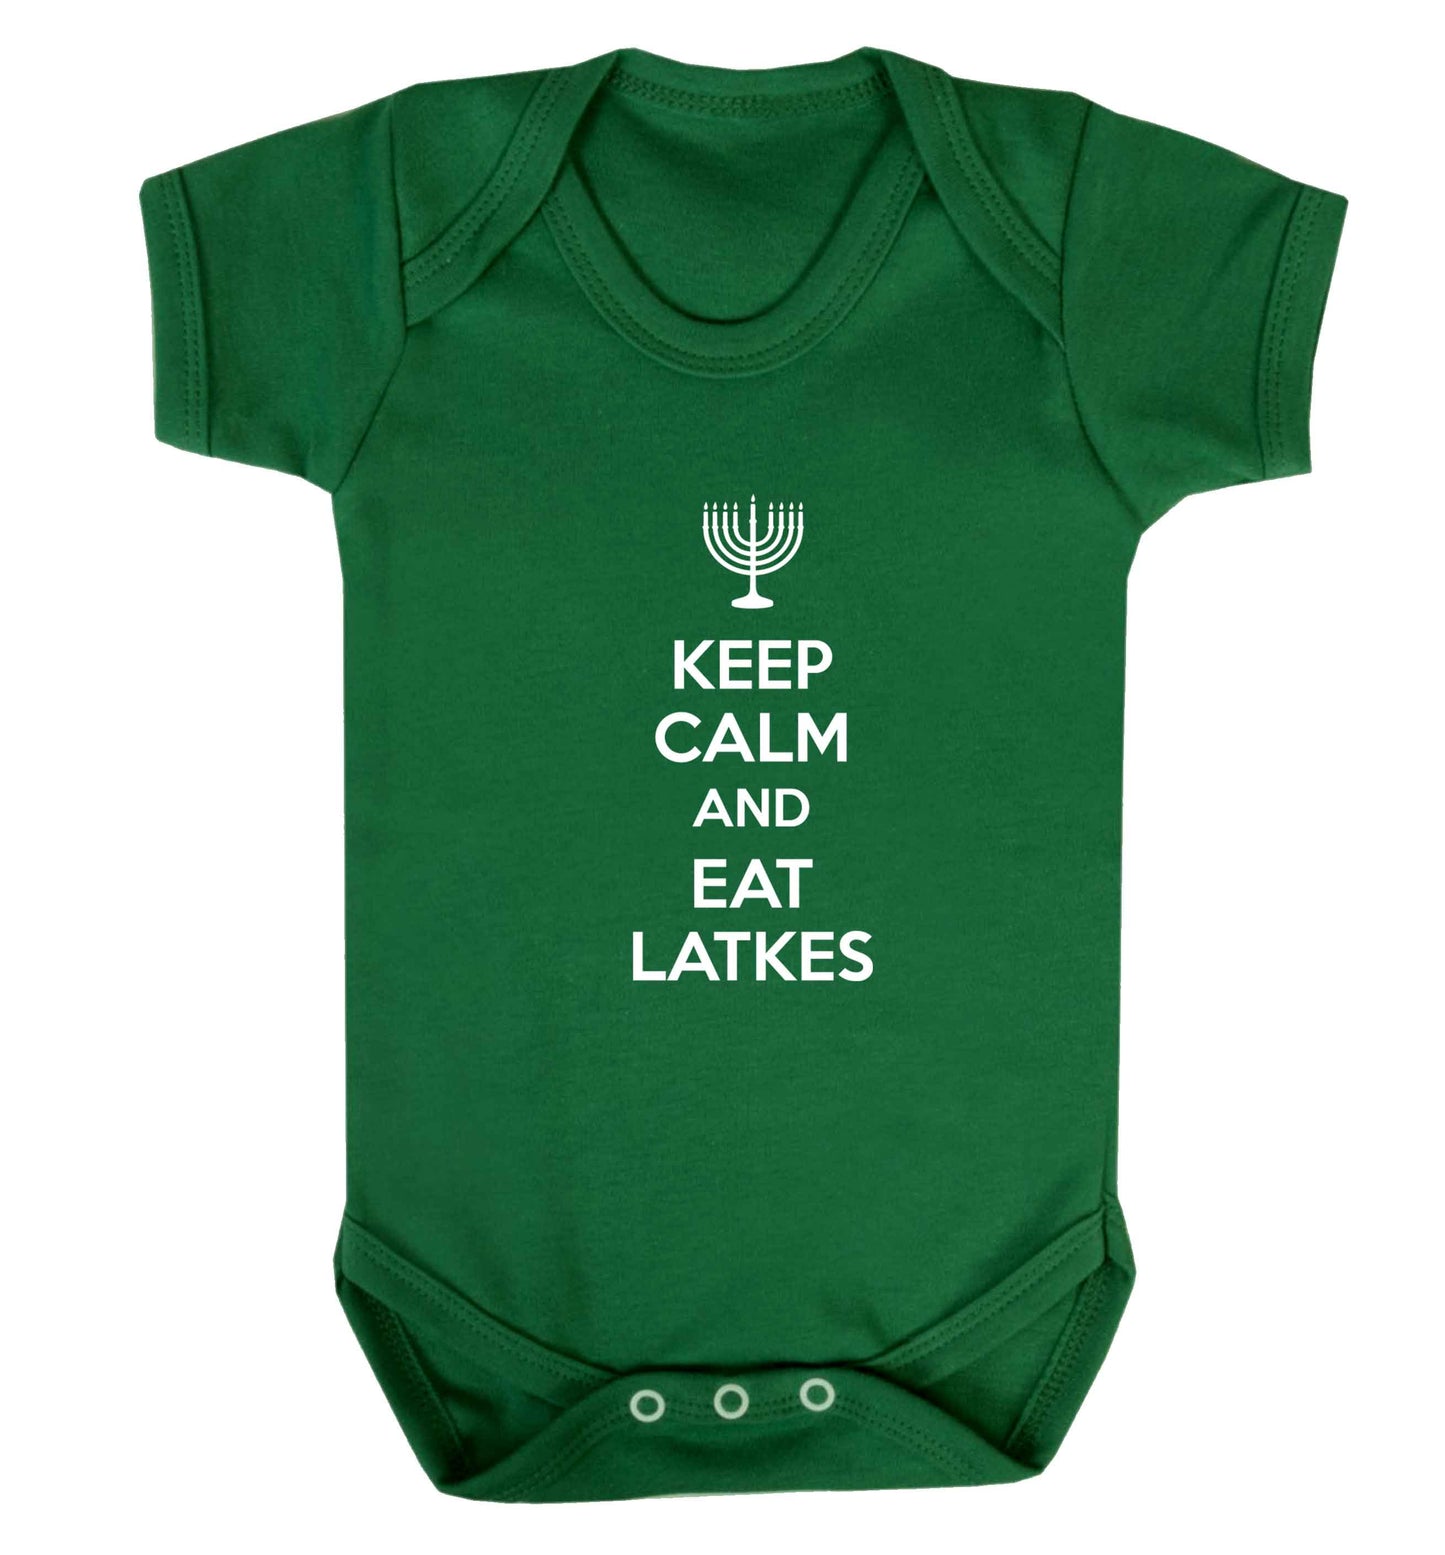 Keep calm and eat latkes baby vest green 18-24 months